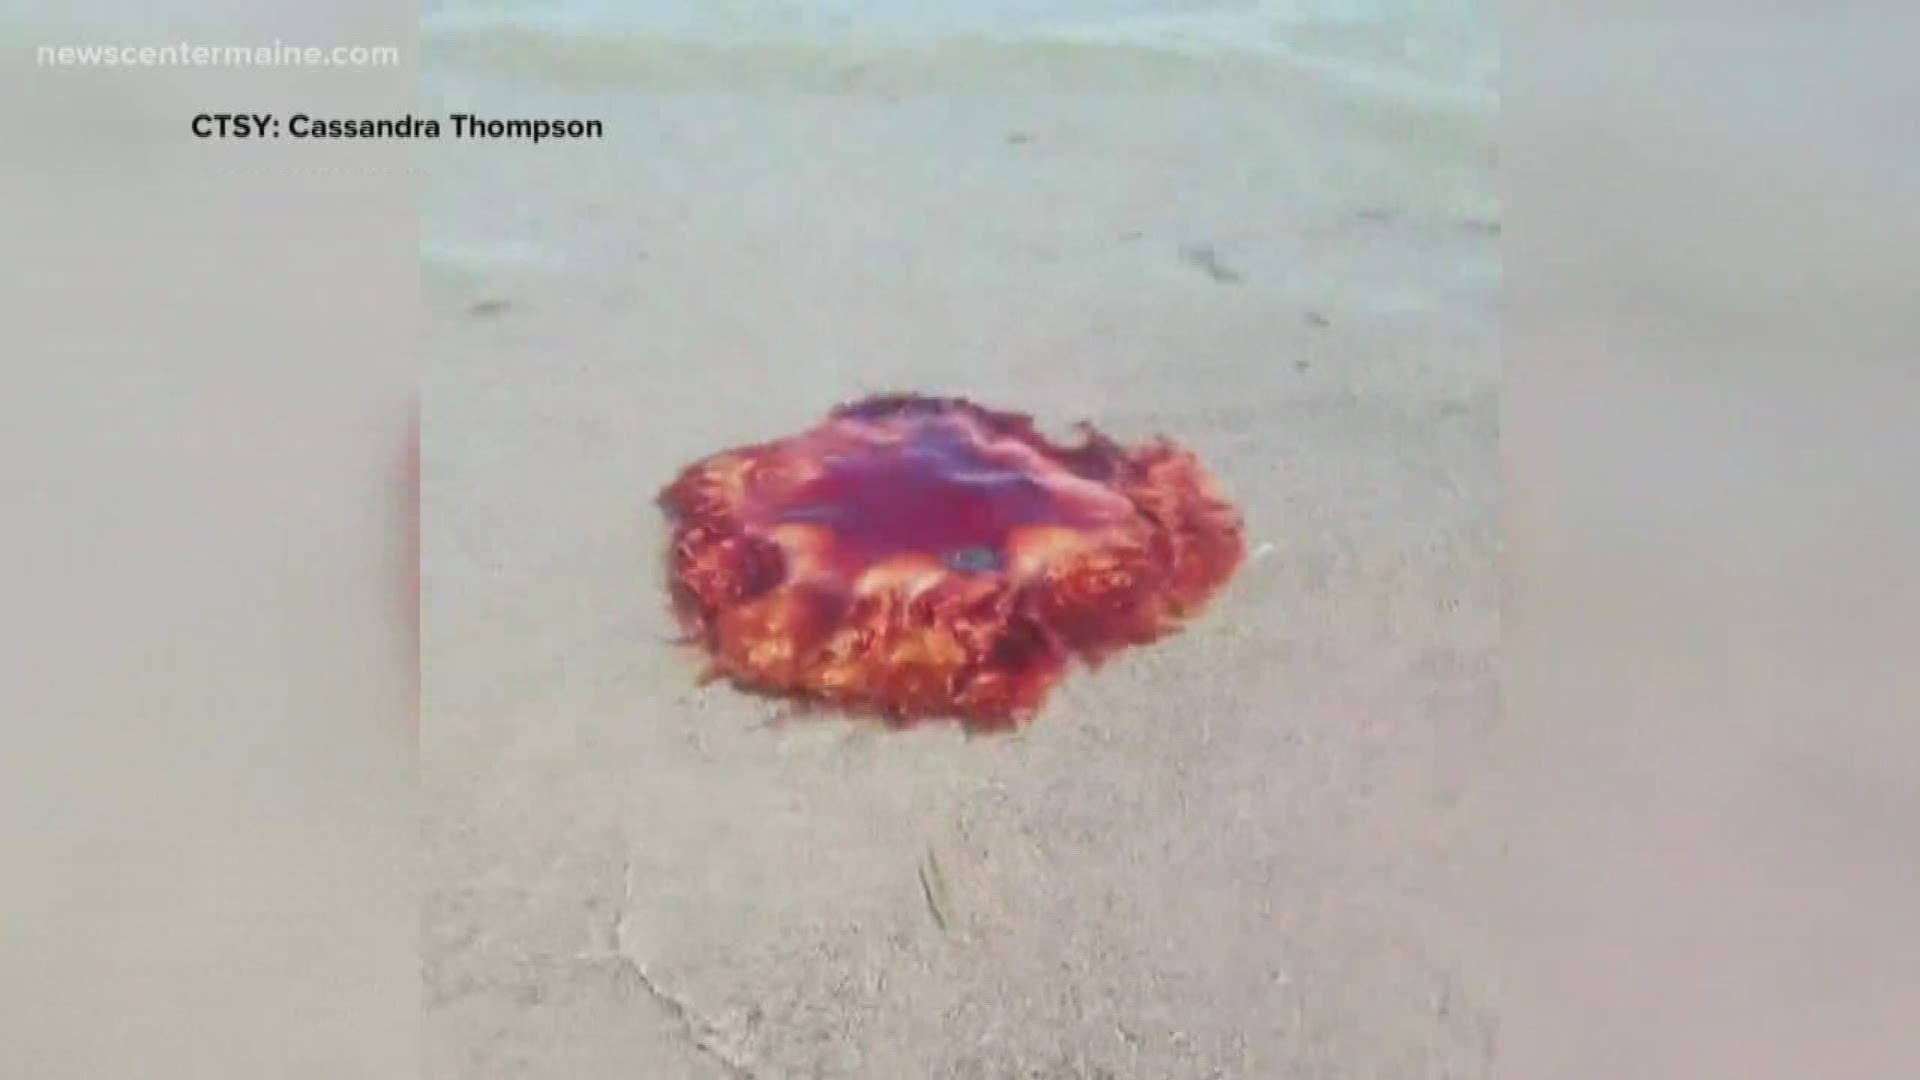 Giant jellyfish sighting reports in Maine